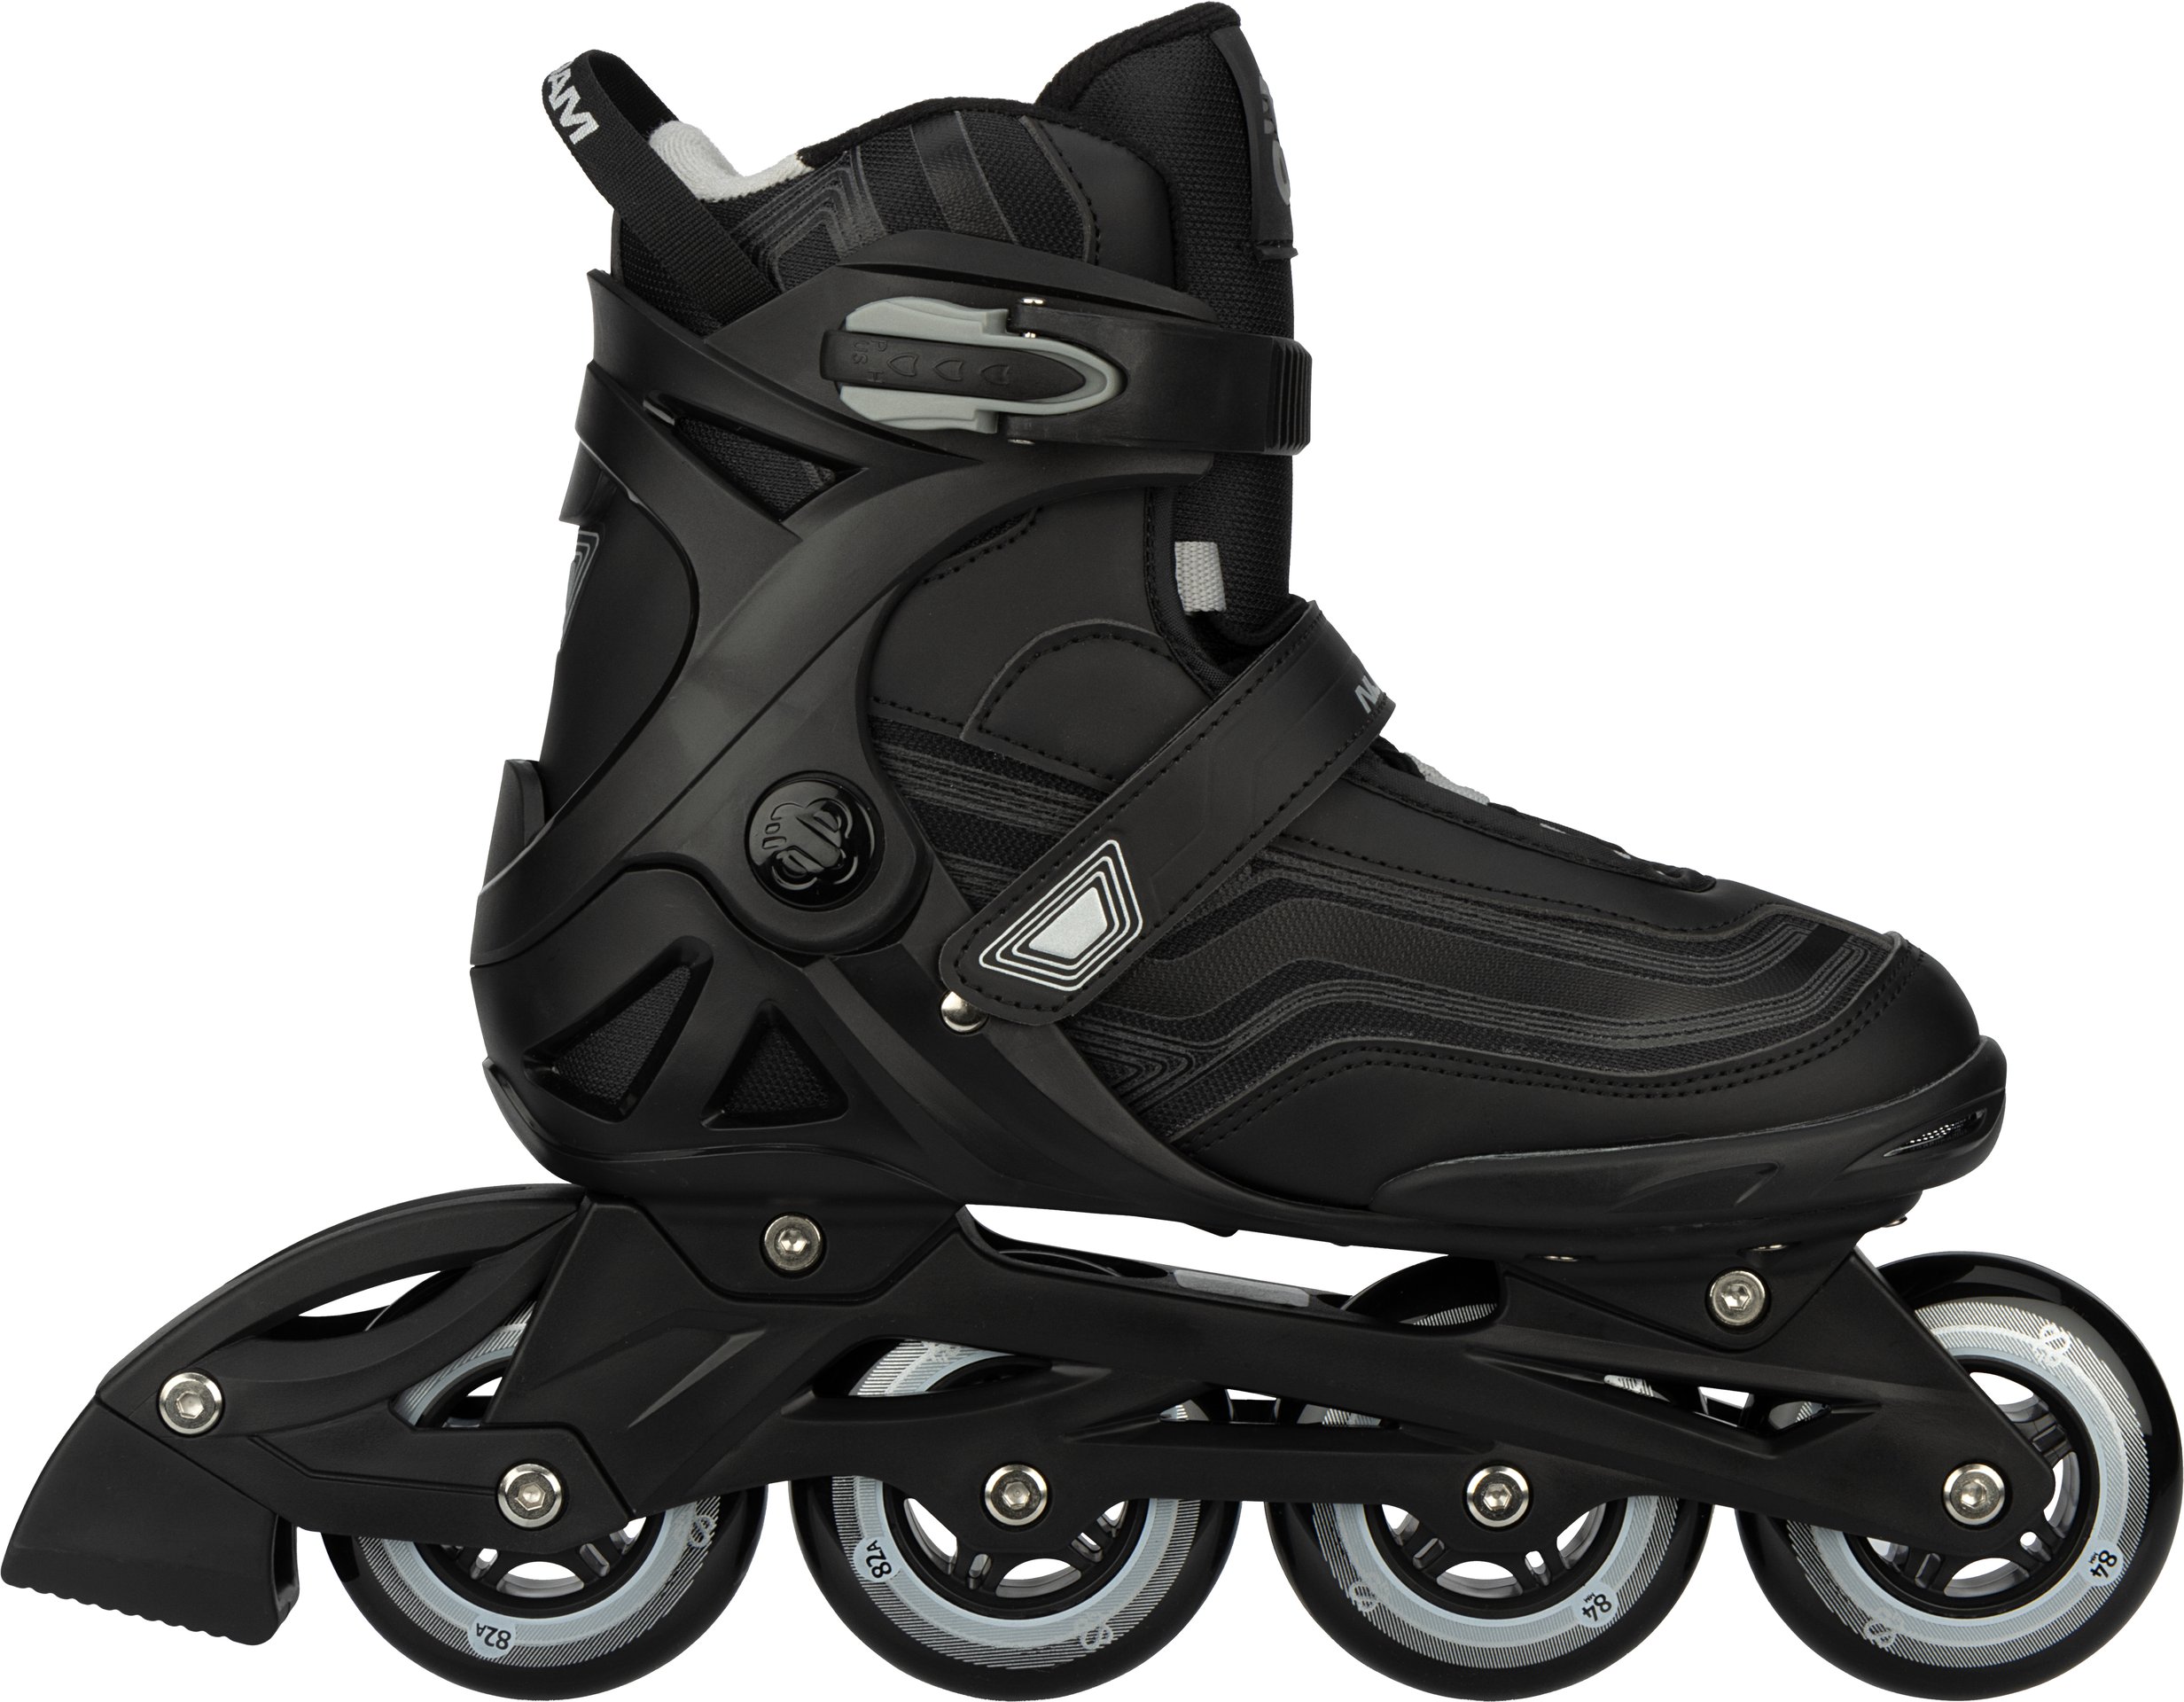 Inline skates Semi Softboot PP chassis - Gear Up!